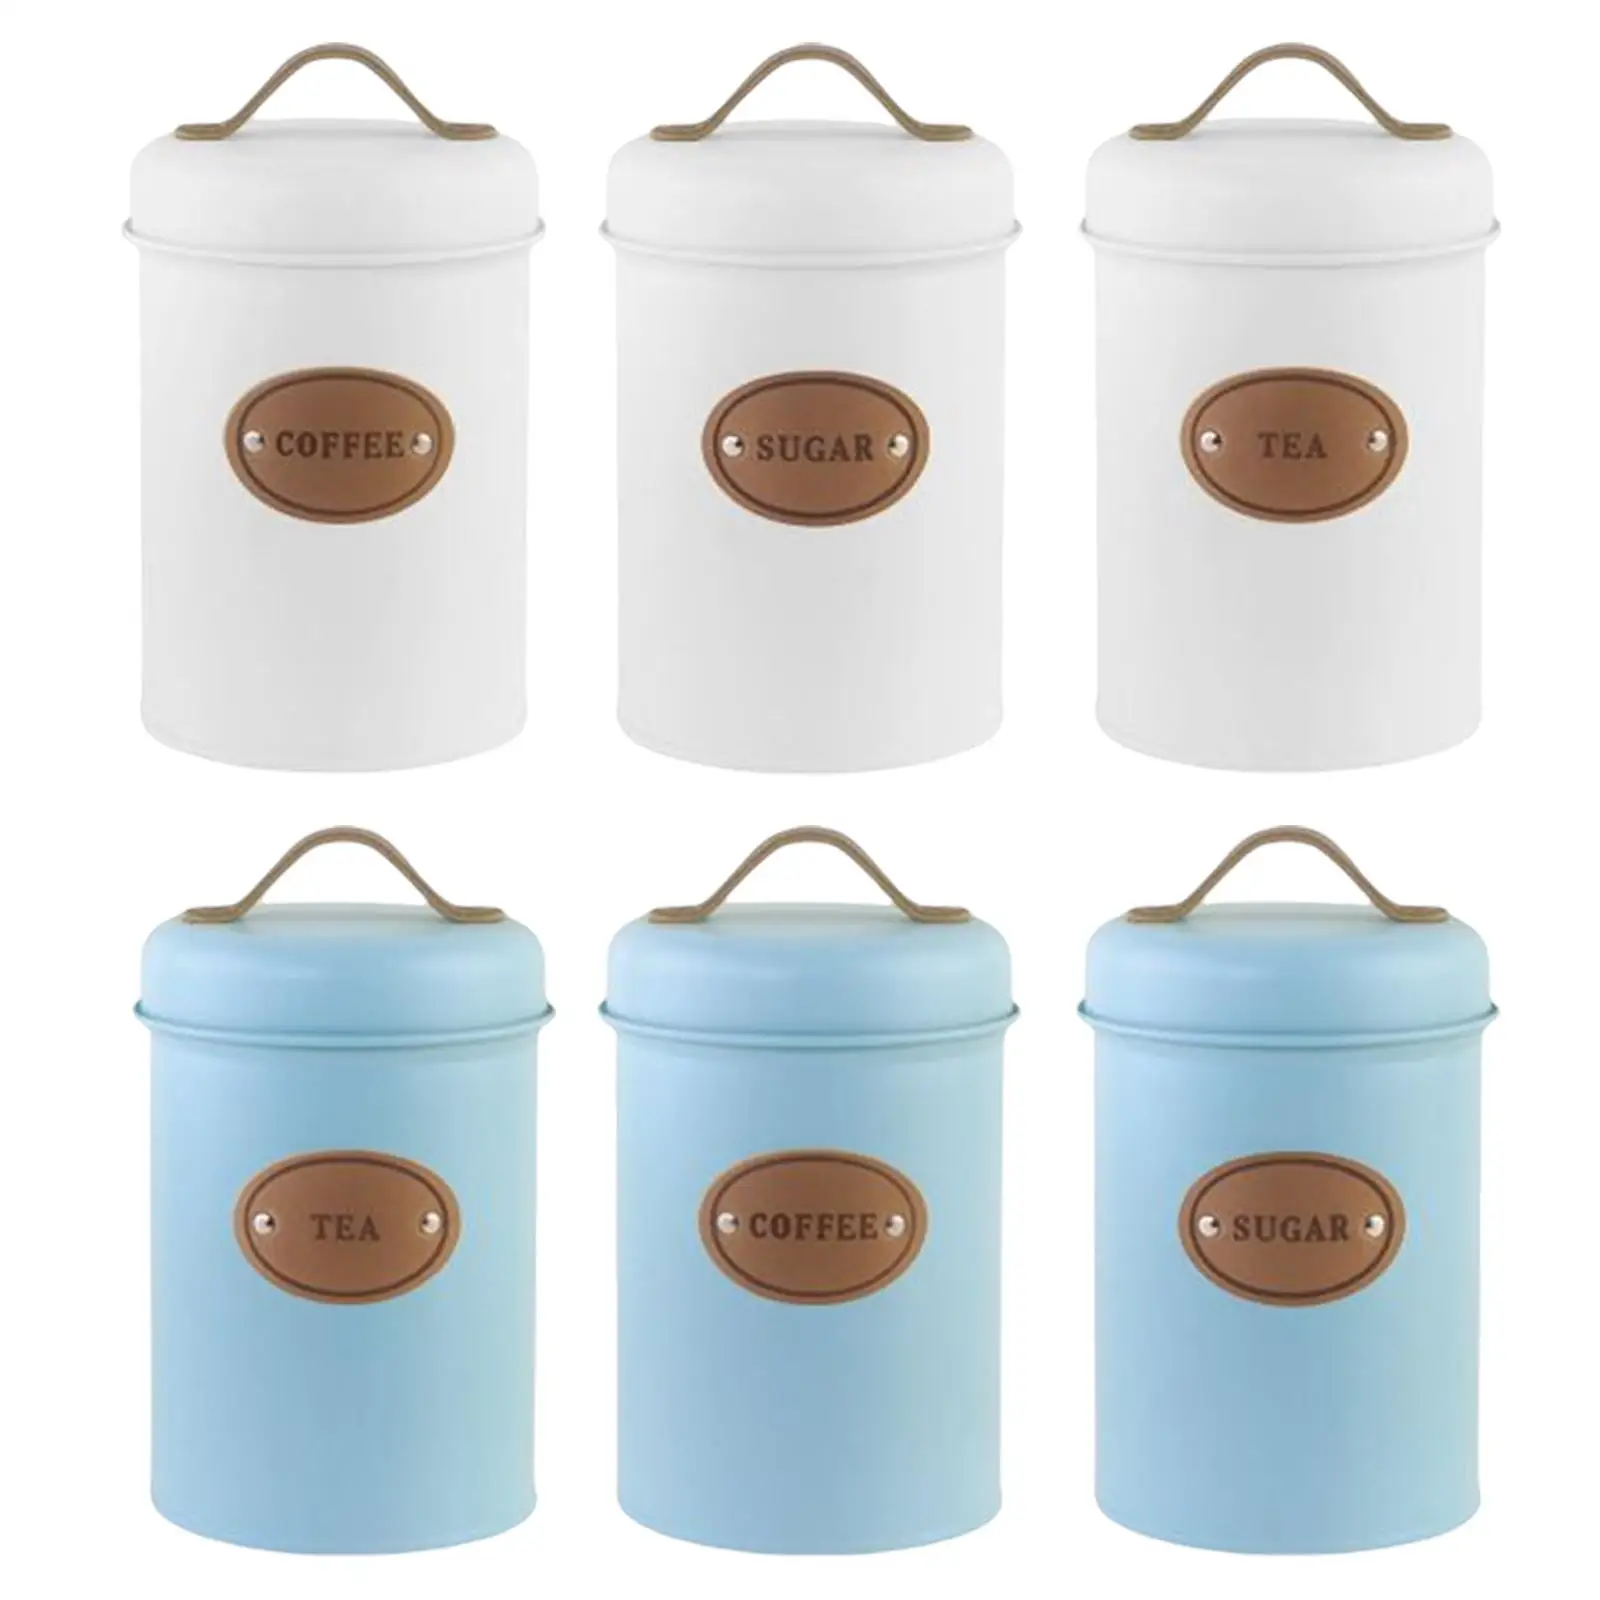 3Pcs Storage Canisters Sugar Coffee Tea Organizer Cylinder with Air Tight Lids Easy Clean Kitchen Canister Set for Kitchen